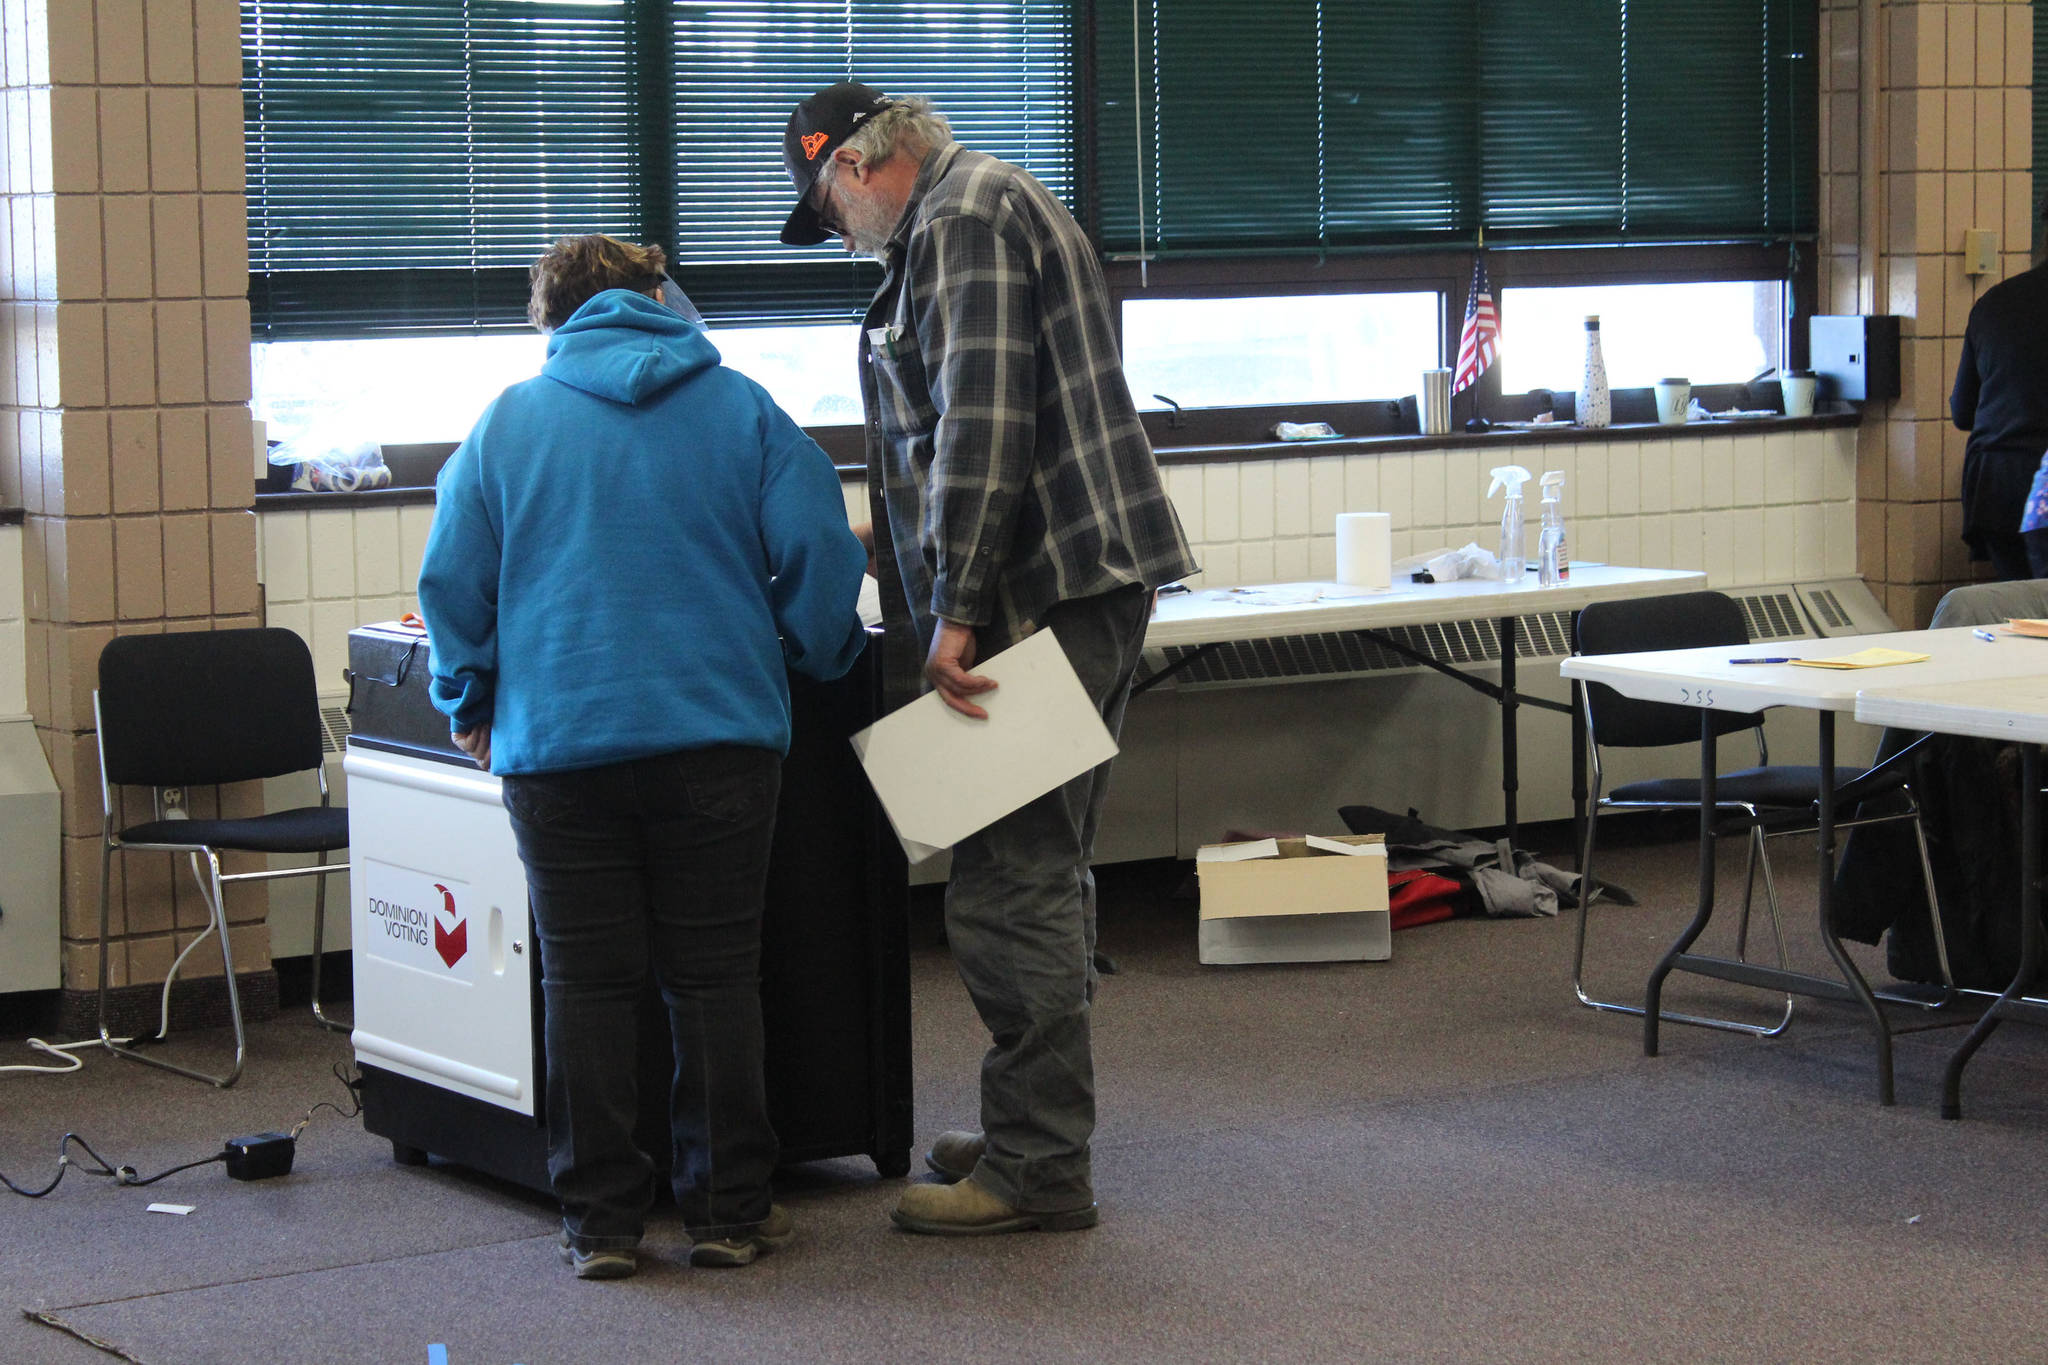 A poll worker helps a voter with his ballot at the Soldotna Regional Sports Complex on Tuesday, Nov. 3 in Soldotna, Alaska. (Photo by Ashlyn O’Hara/Peninsula Clarion)